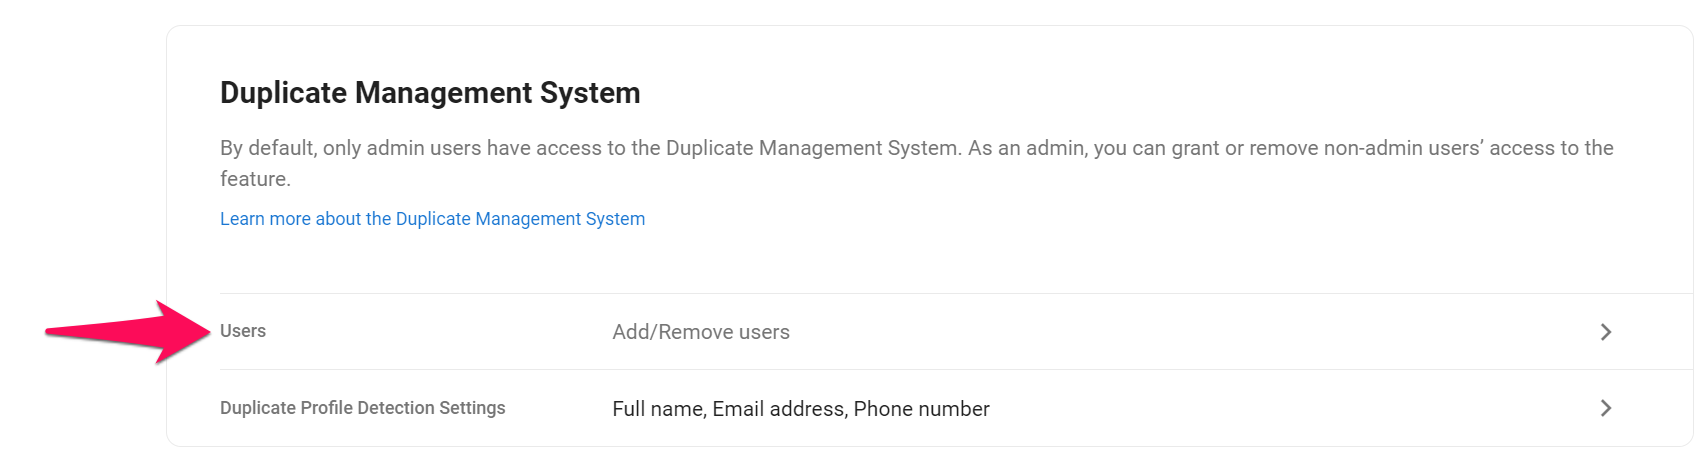 Duplicate Management System users.png